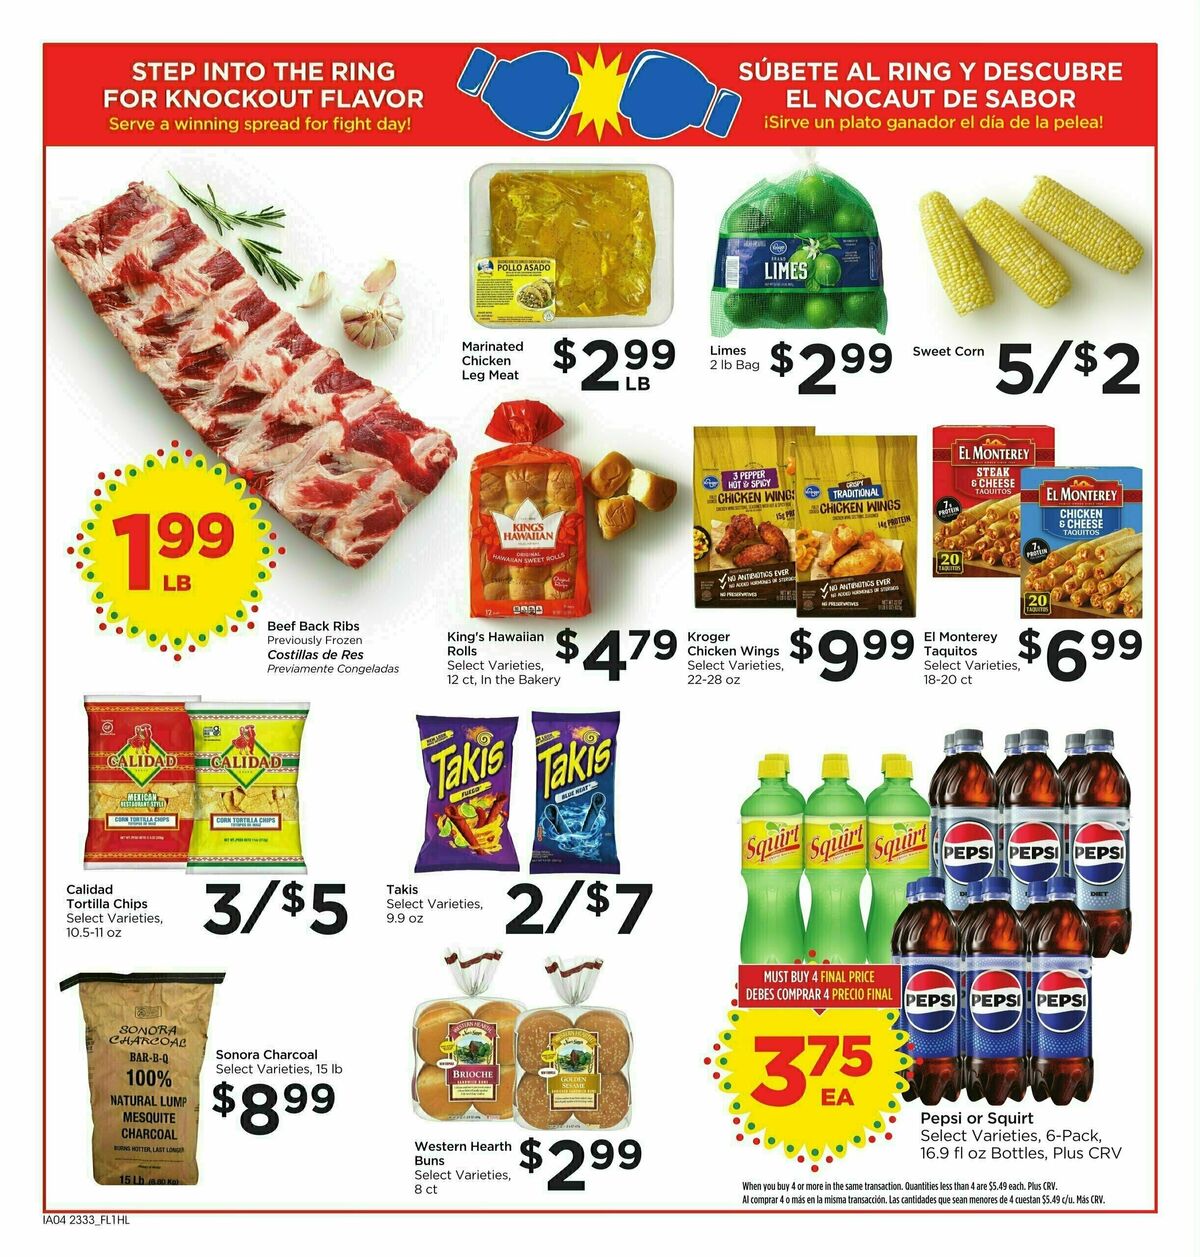 Food 4 Less Weekly Ad from September 13